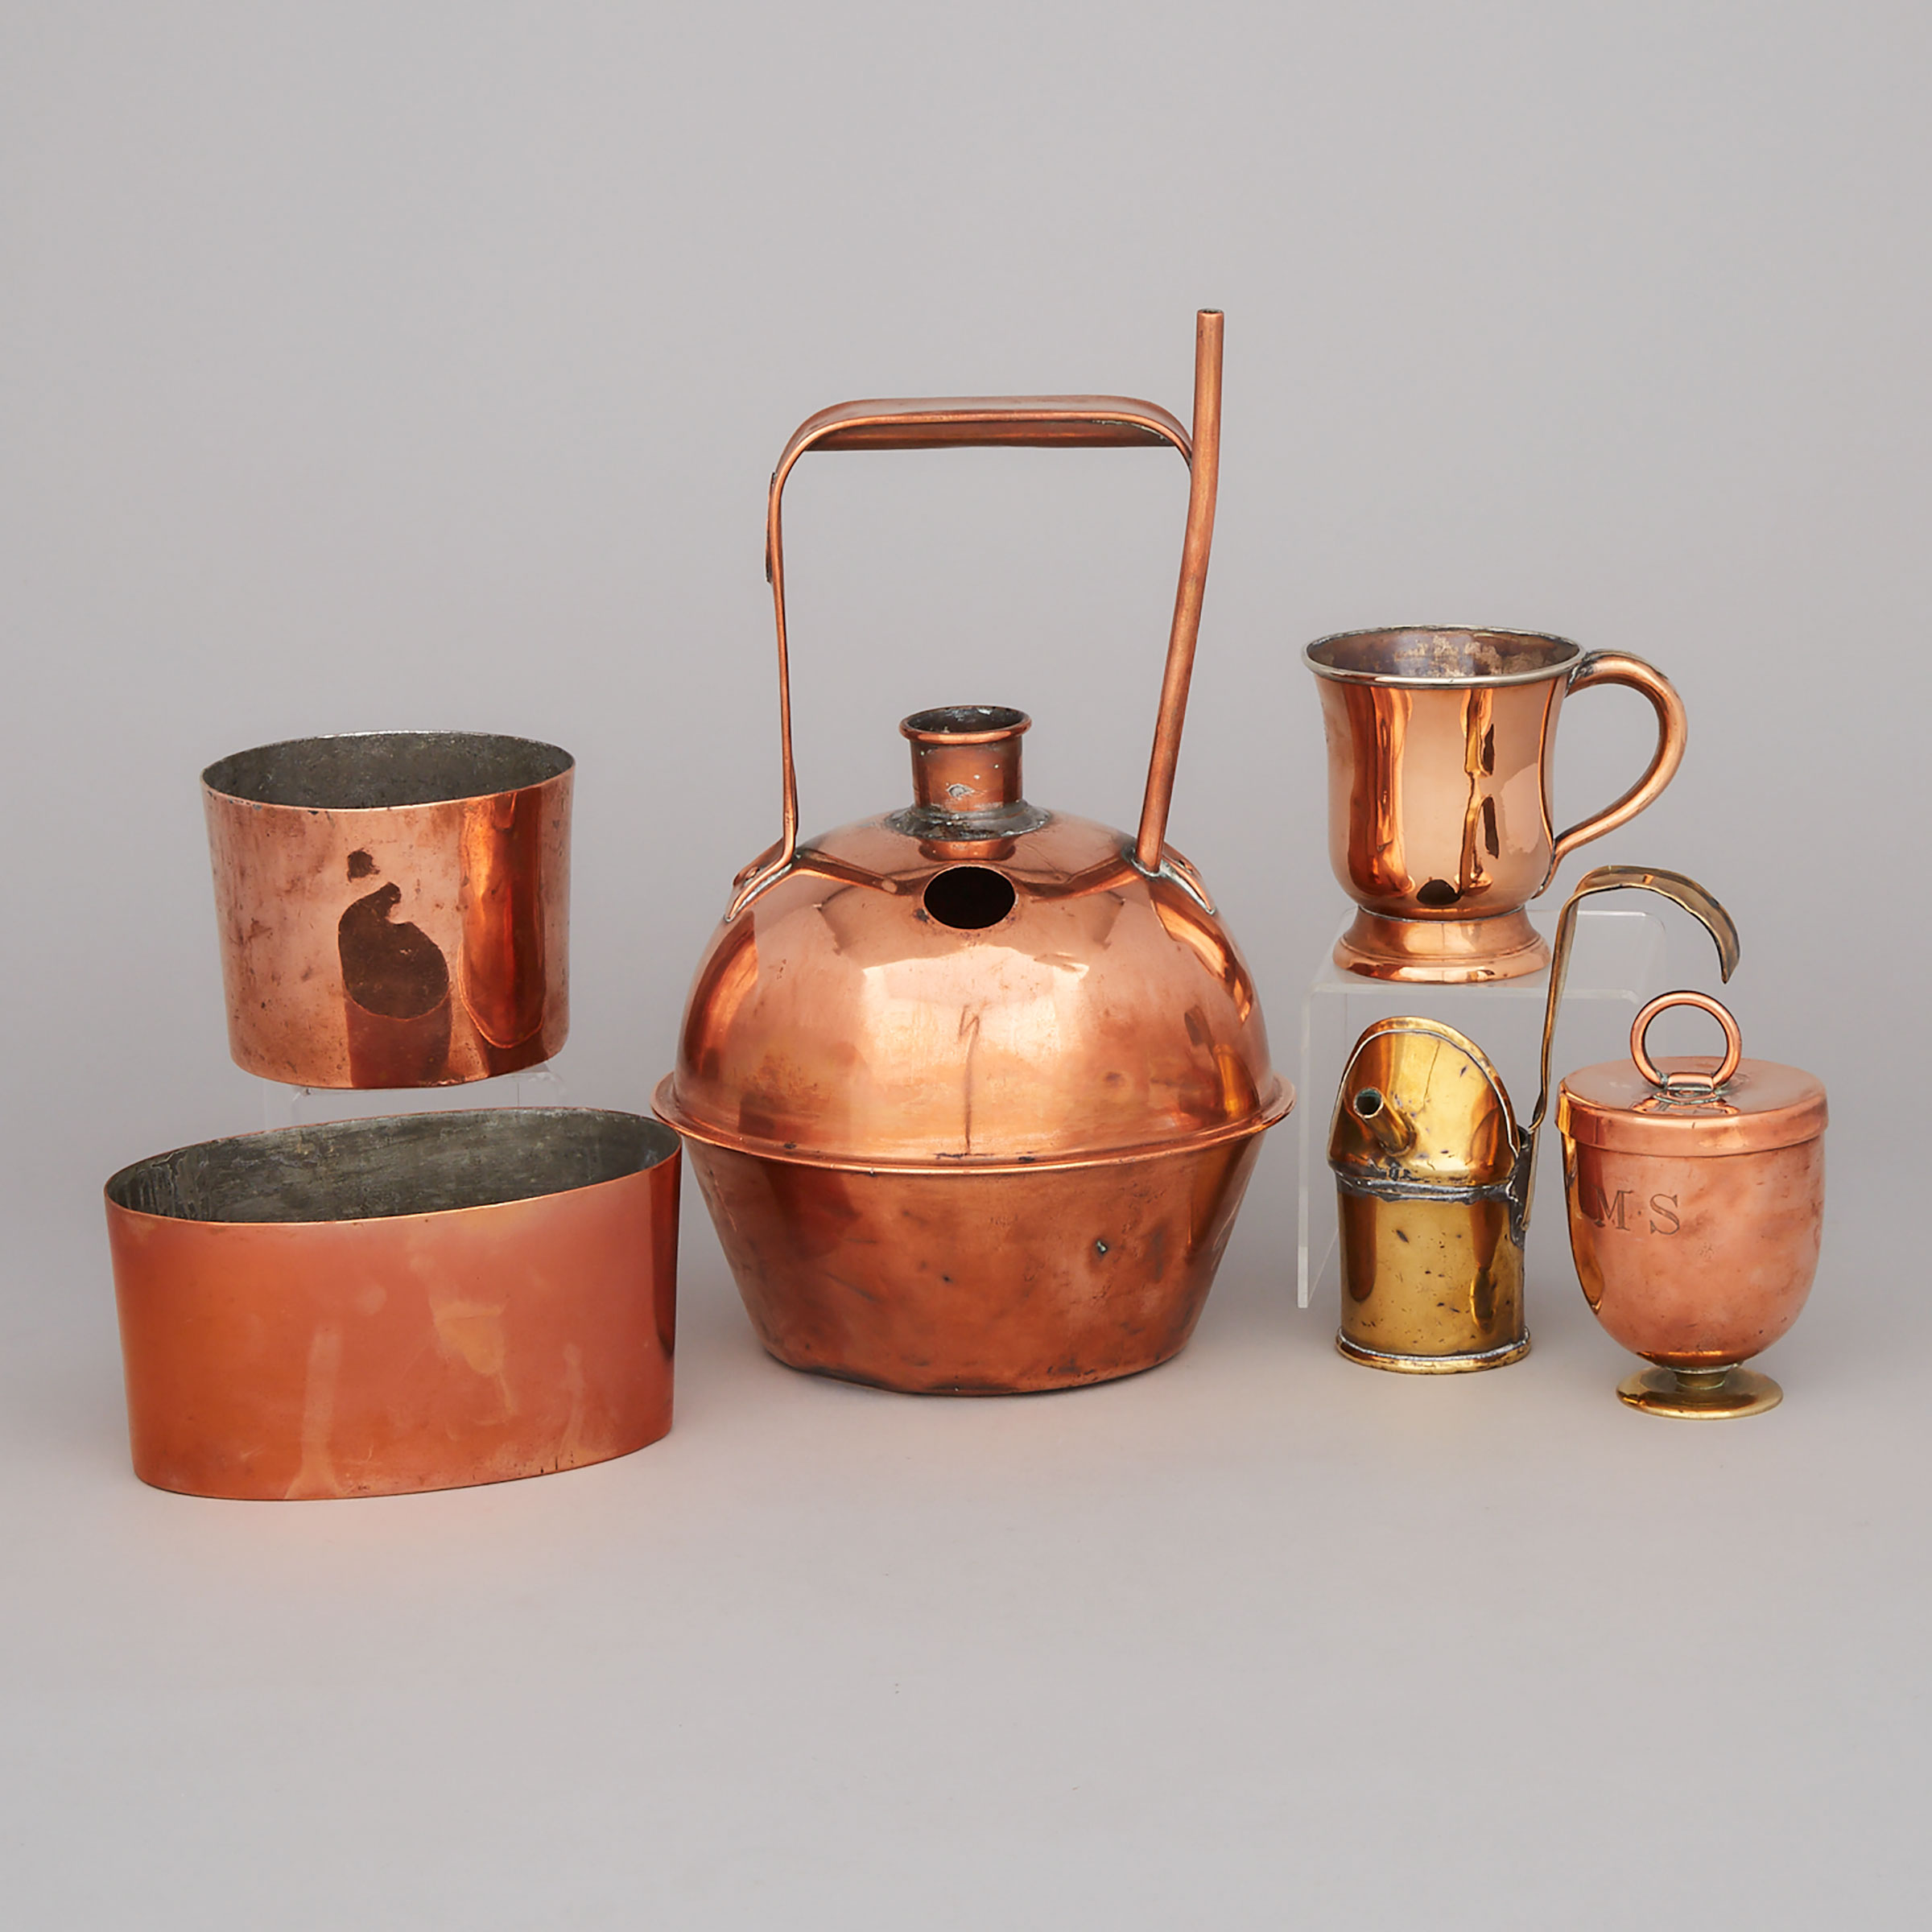 Group of Mostly Copper Wares, 19th century